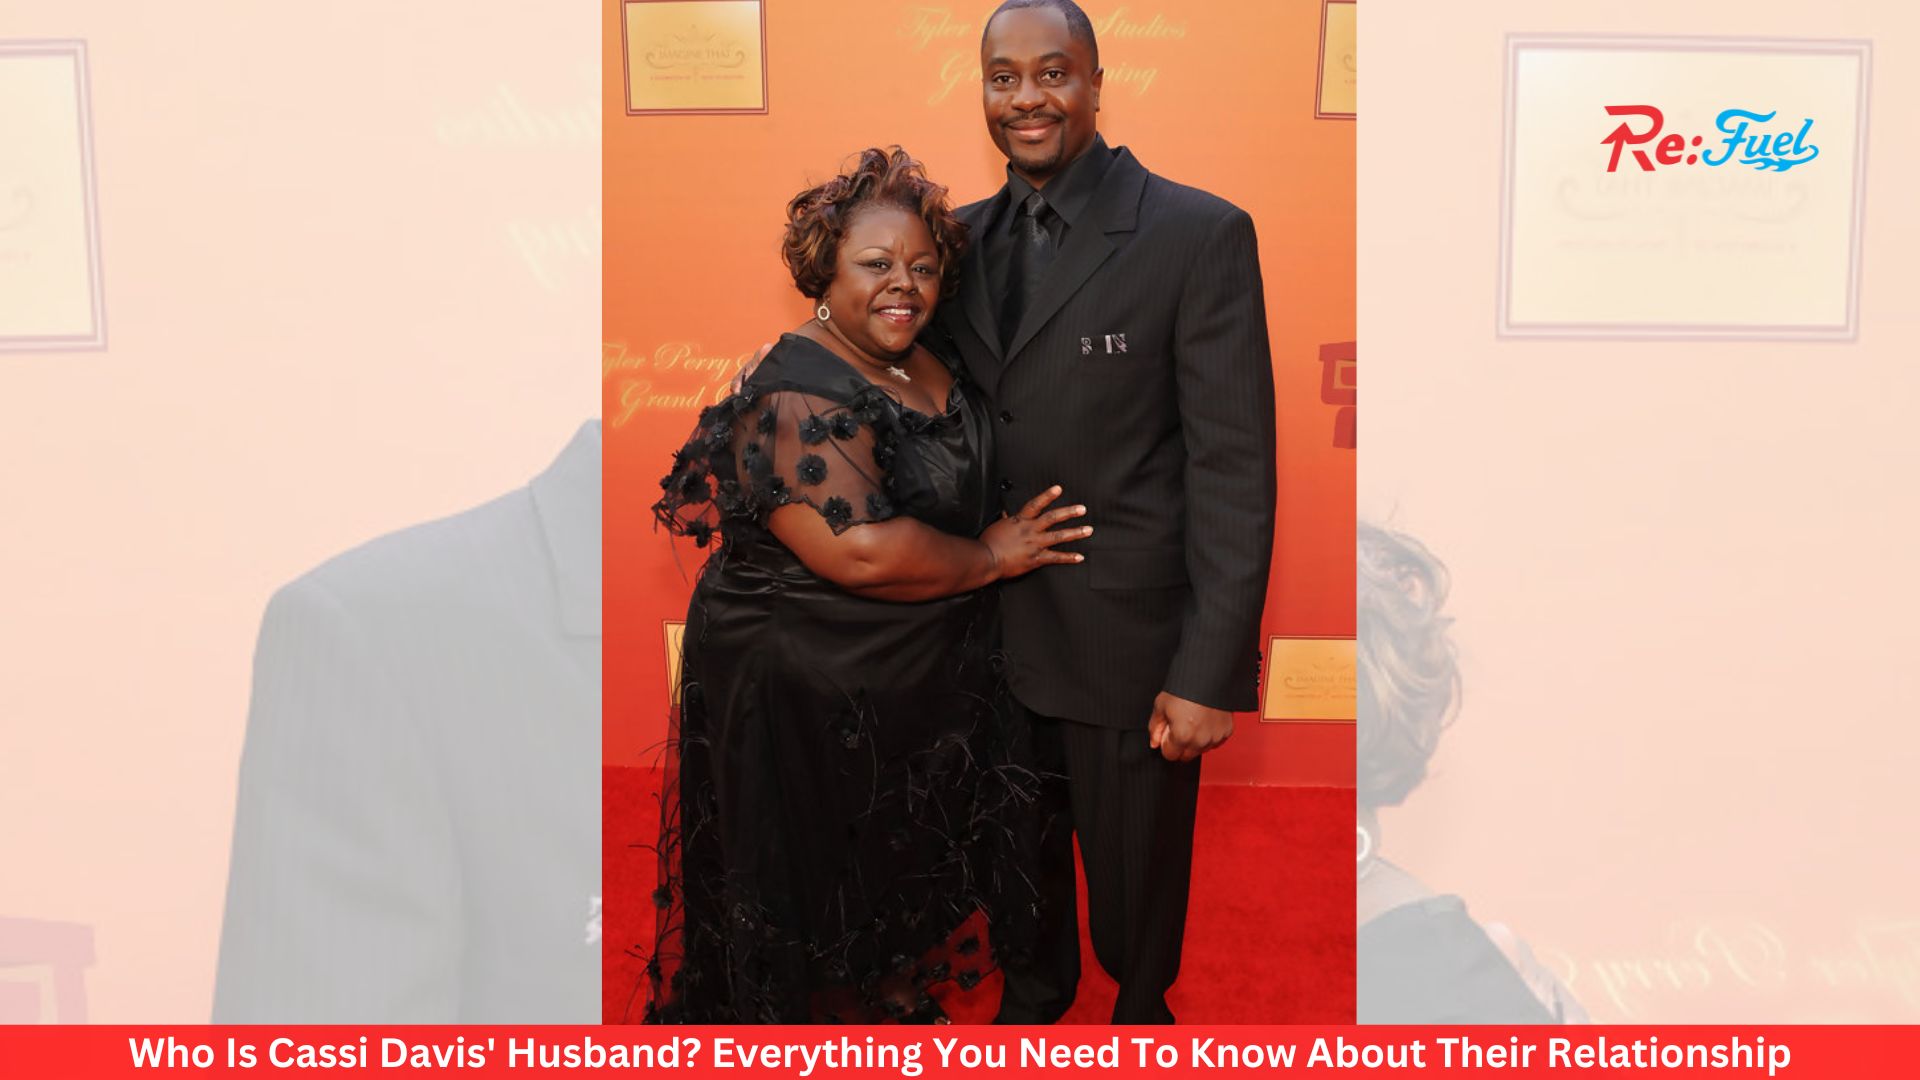 Who Is Cassi Davis' Husband? Everything You Need To Know About Their Relationship